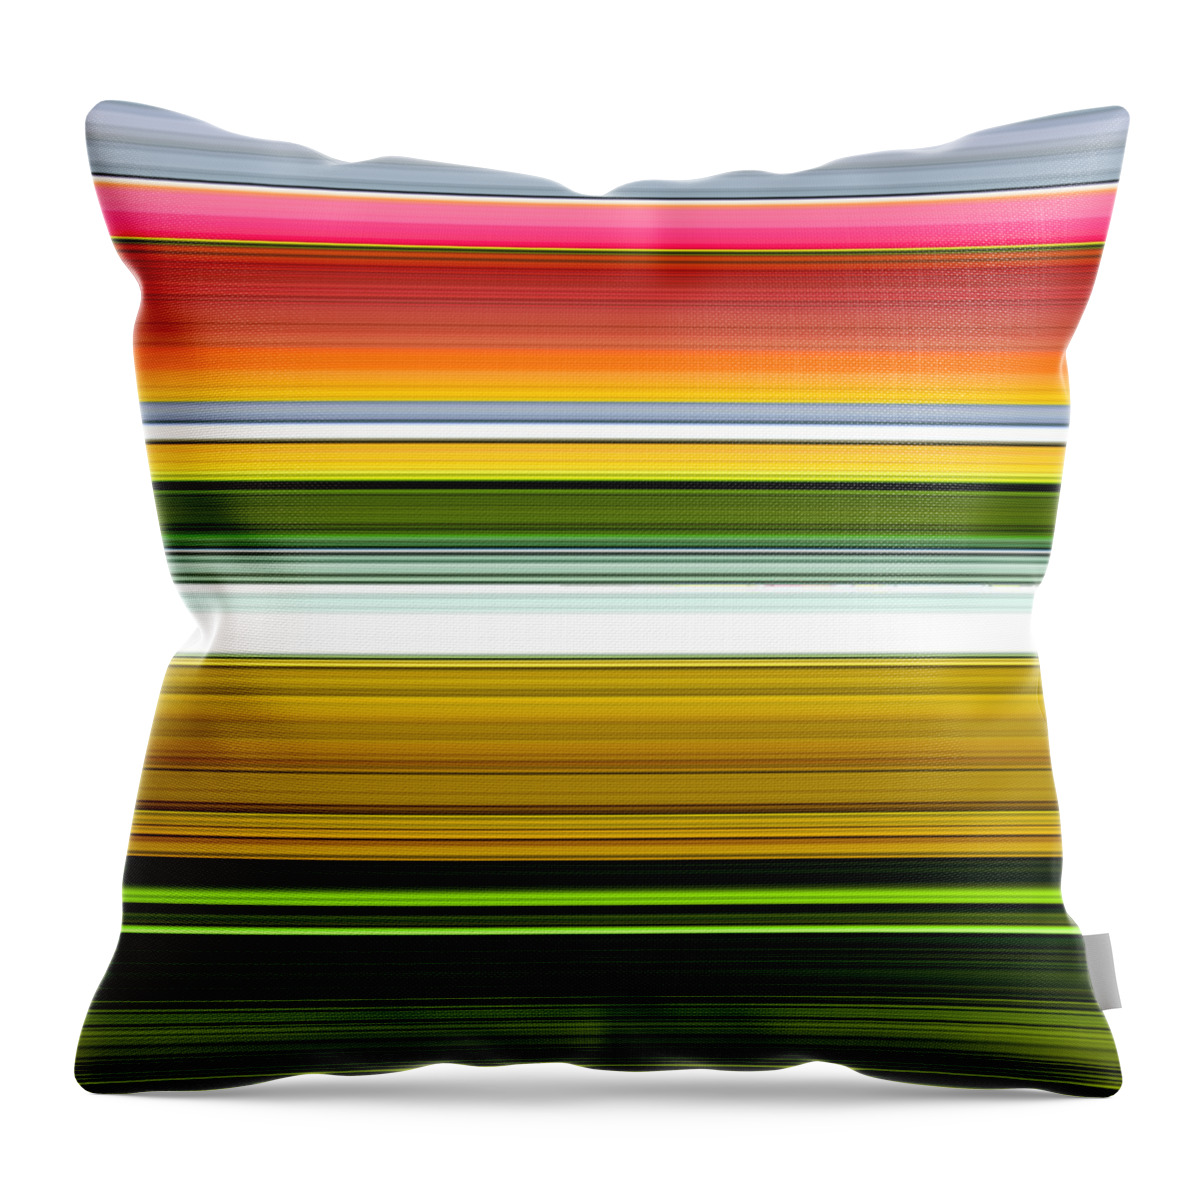 Extract Throw Pillow featuring the digital art December Extract by Chuck Staley